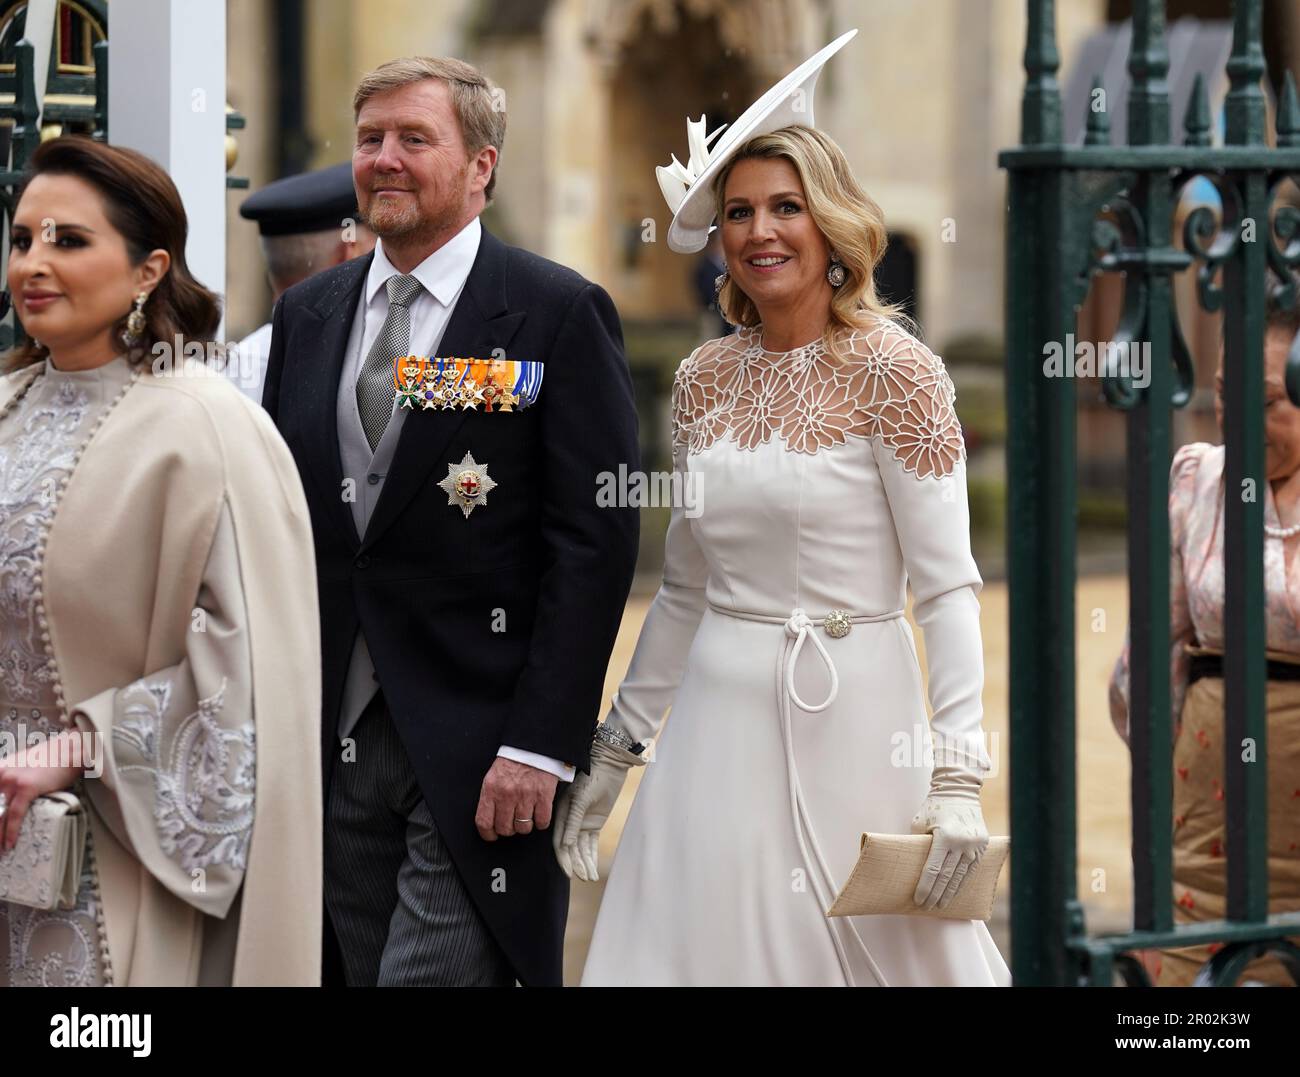 Queen Maxima of Netherlands Goes Sheer at King Charles' Coronation